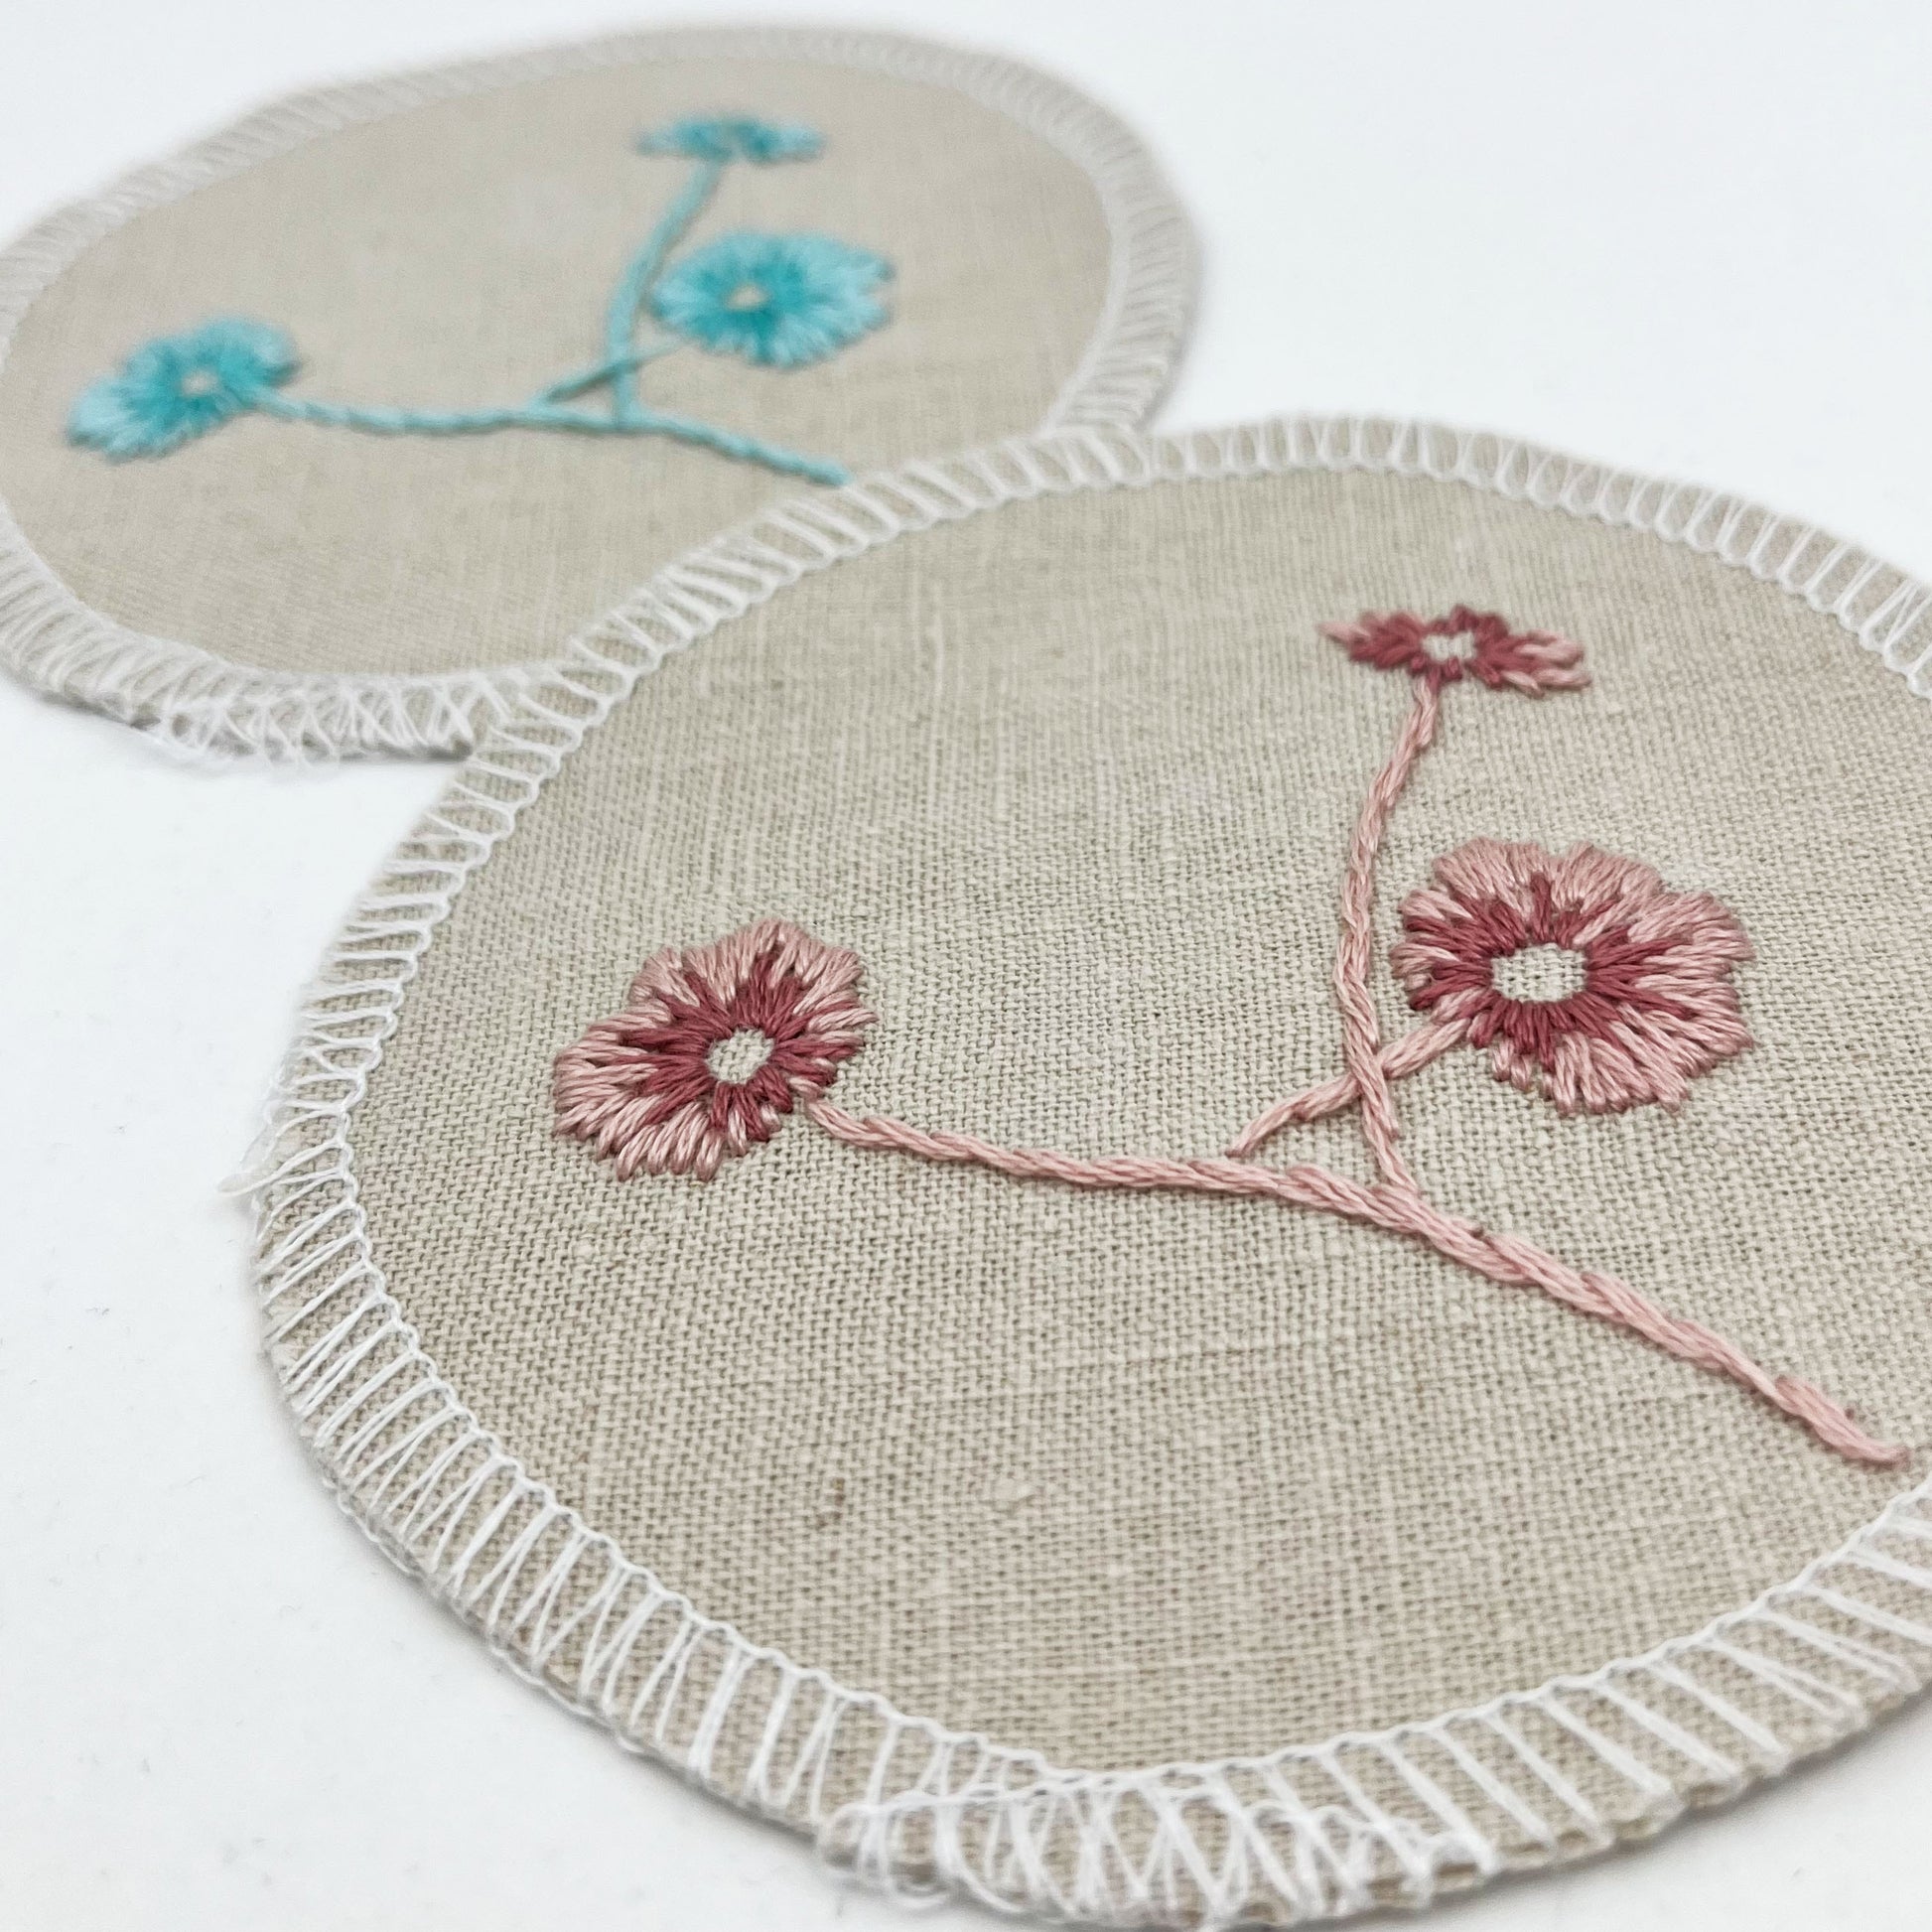 Two circle shaped patches, made from a natural color linen fabric, hand embroidered with 3 poppies, one patch in pink and one in robin's egg blues, edges overlocked with white thread, on a white background